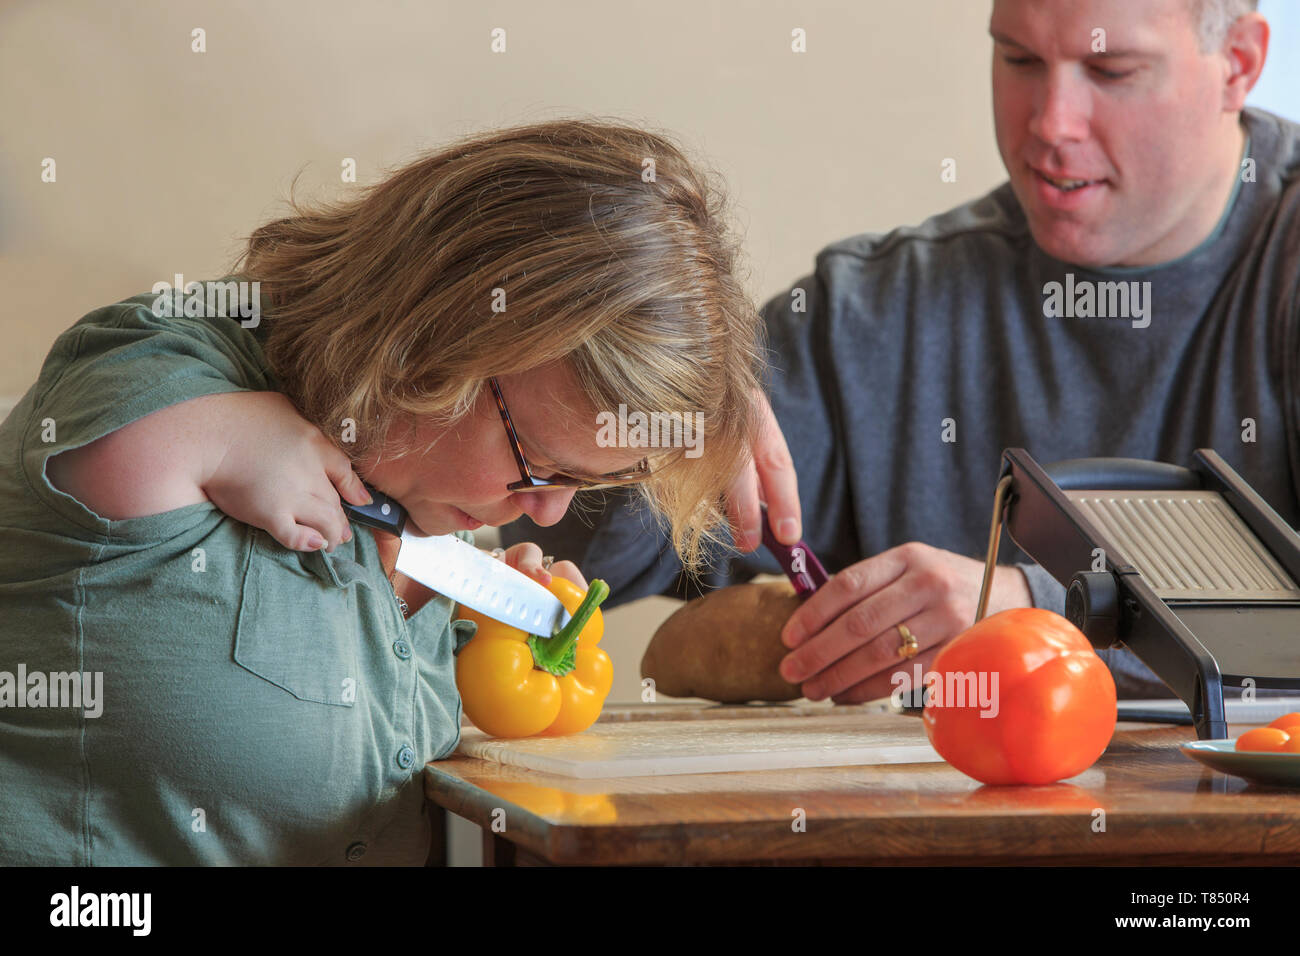 Woman with TAR Syndrome cutting vegetables with her husband in the kitchen Stock Photo